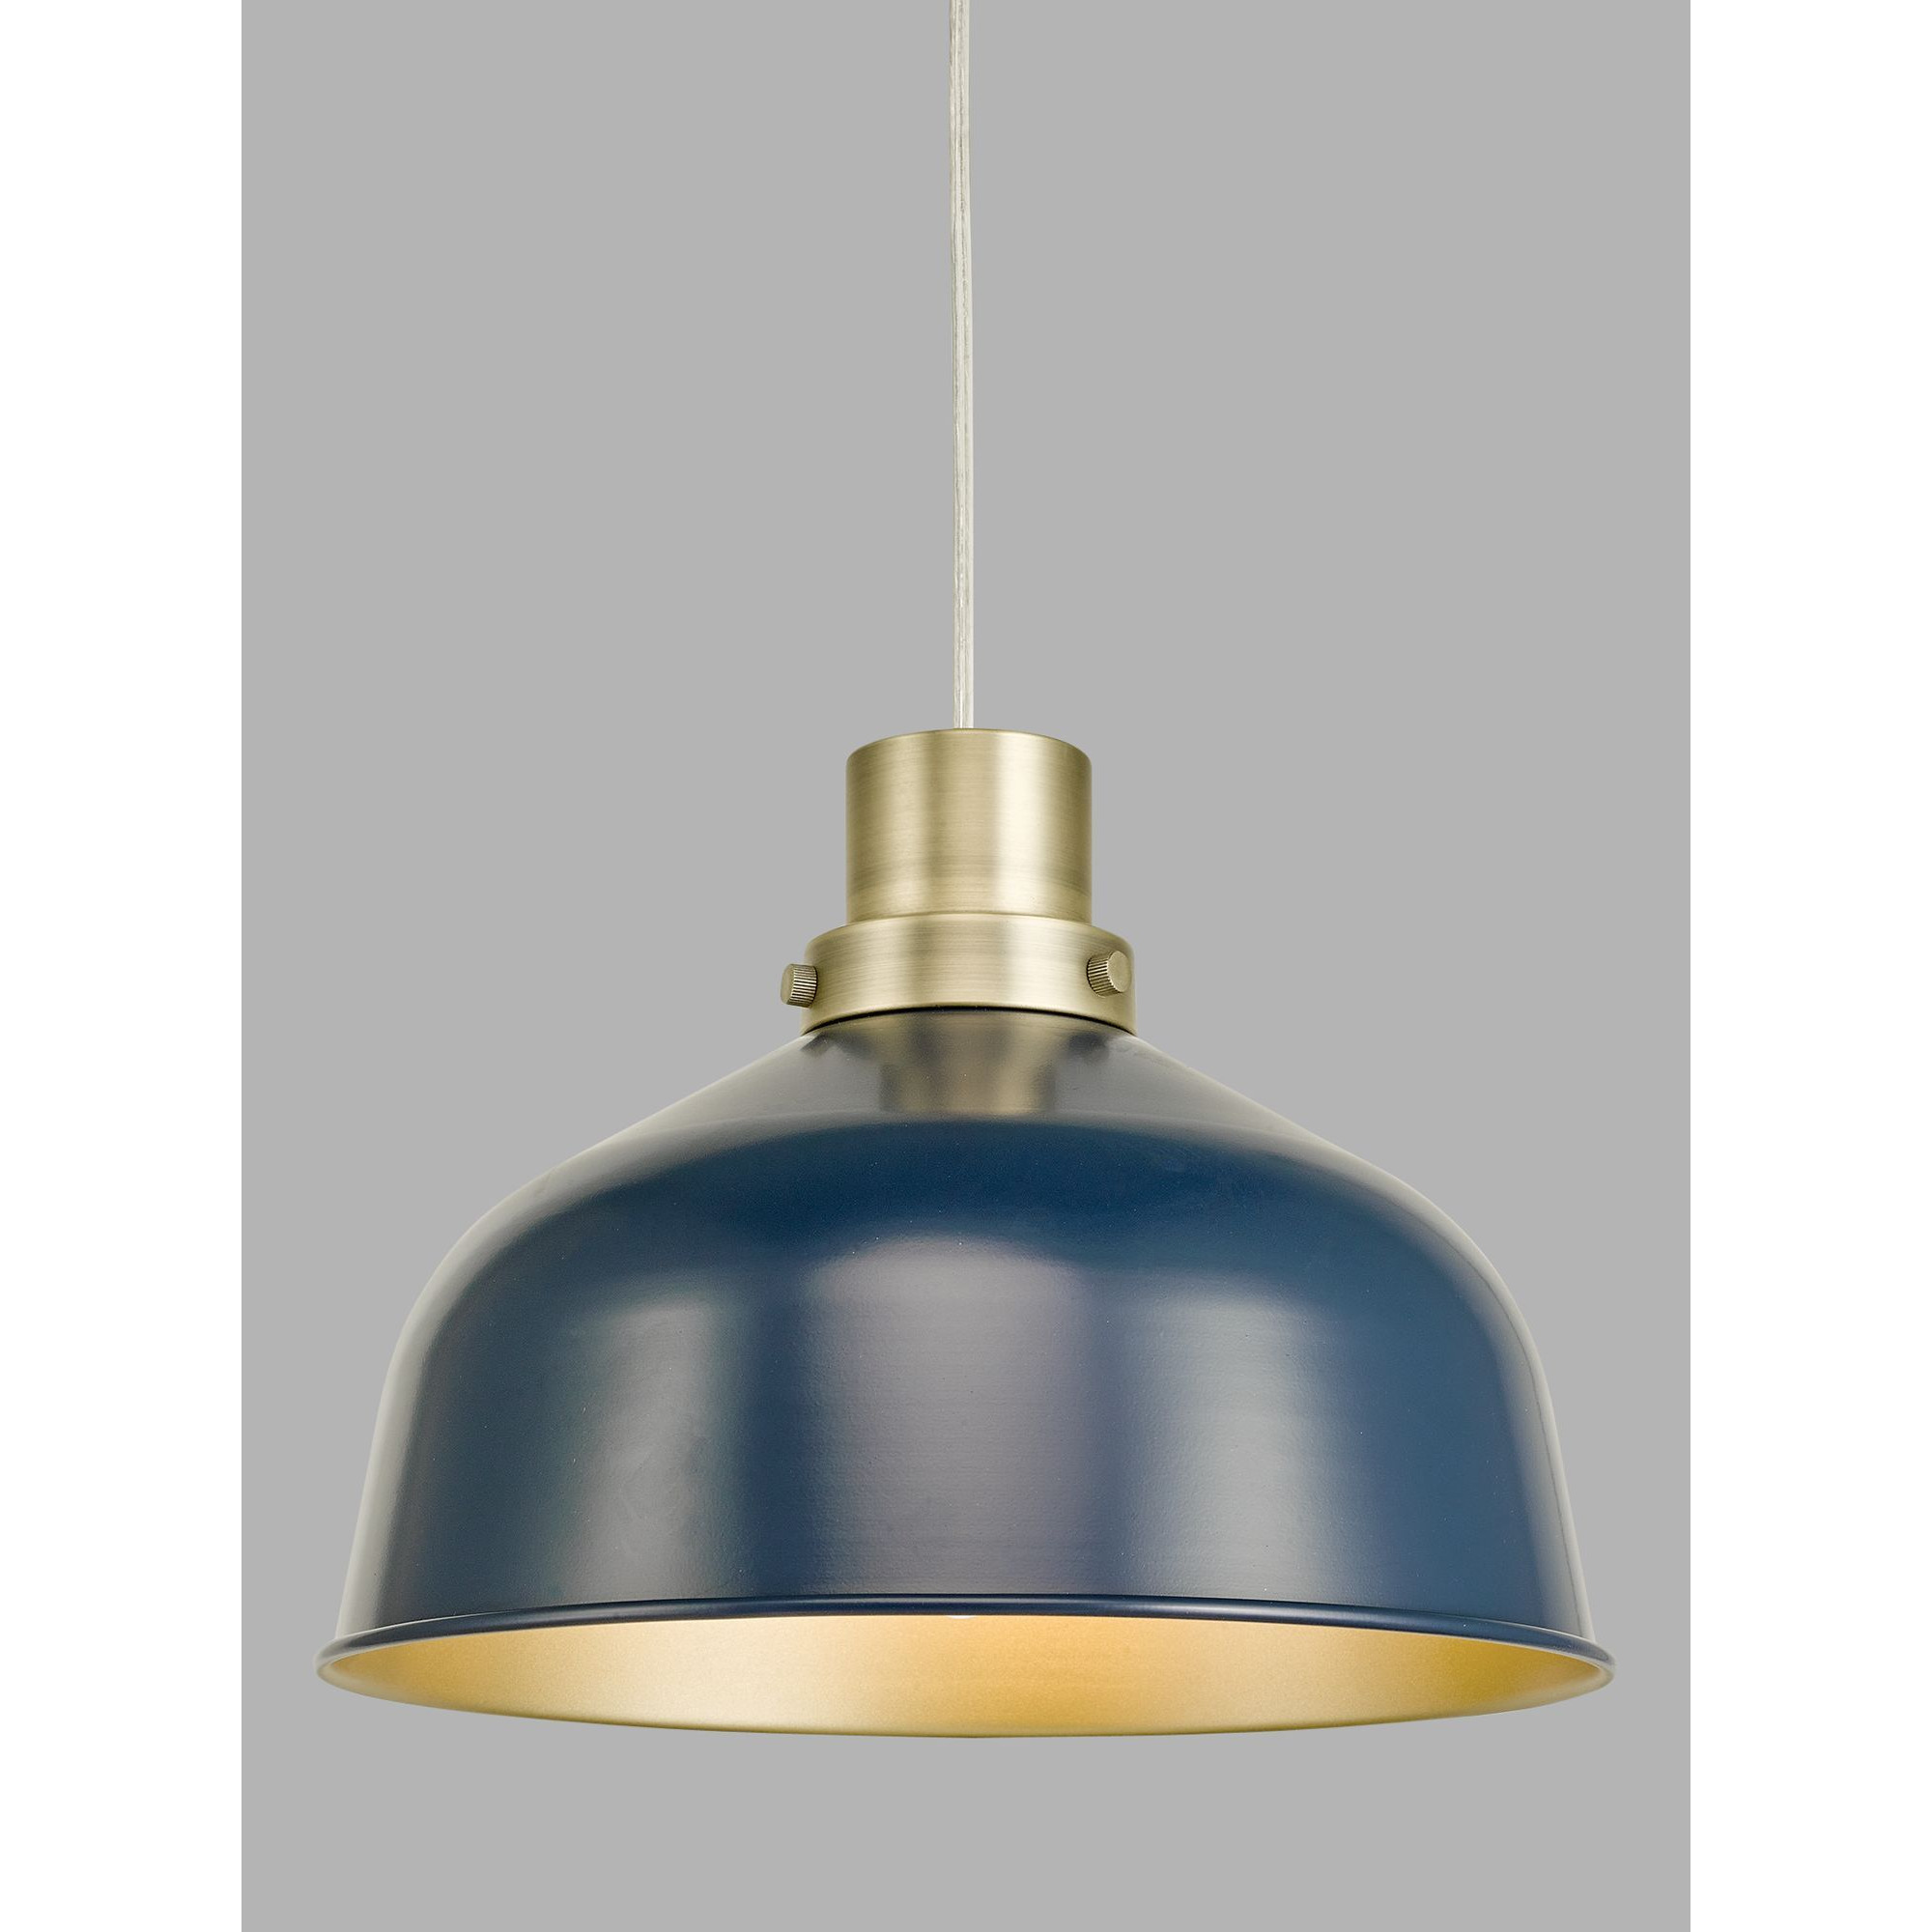 John Lewis Industrial Dome Easy-to-Fit Ceiling Shade - image 1